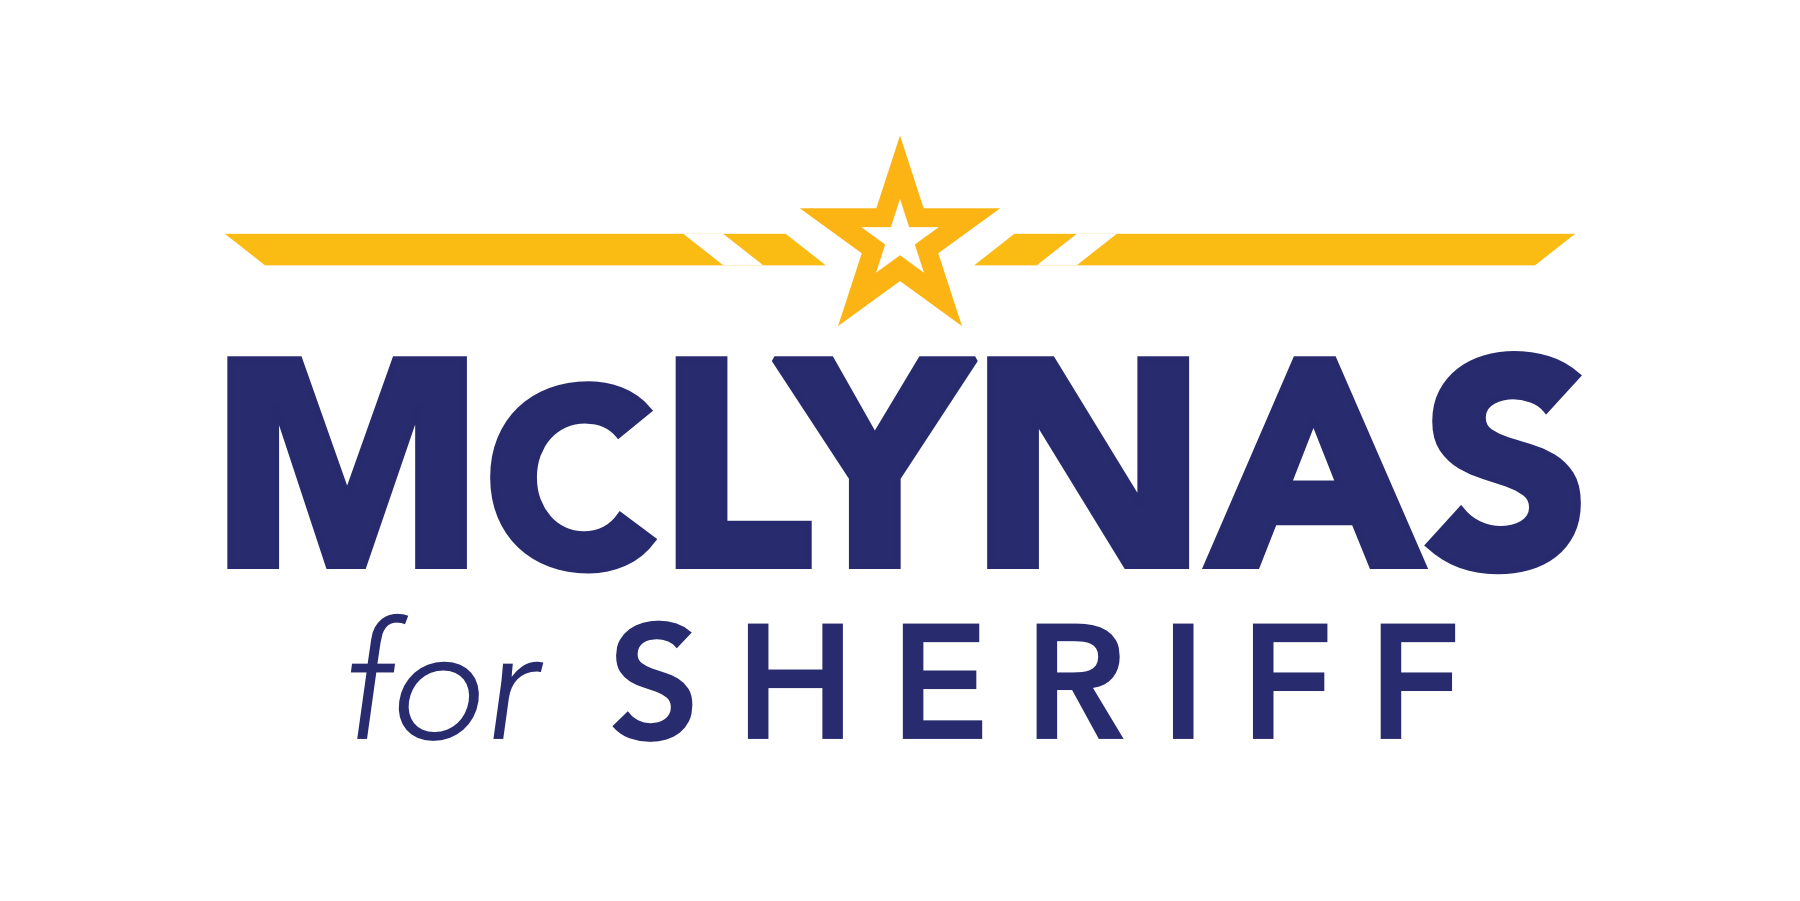 James McLynas for Sheriff of Pinellas County logo